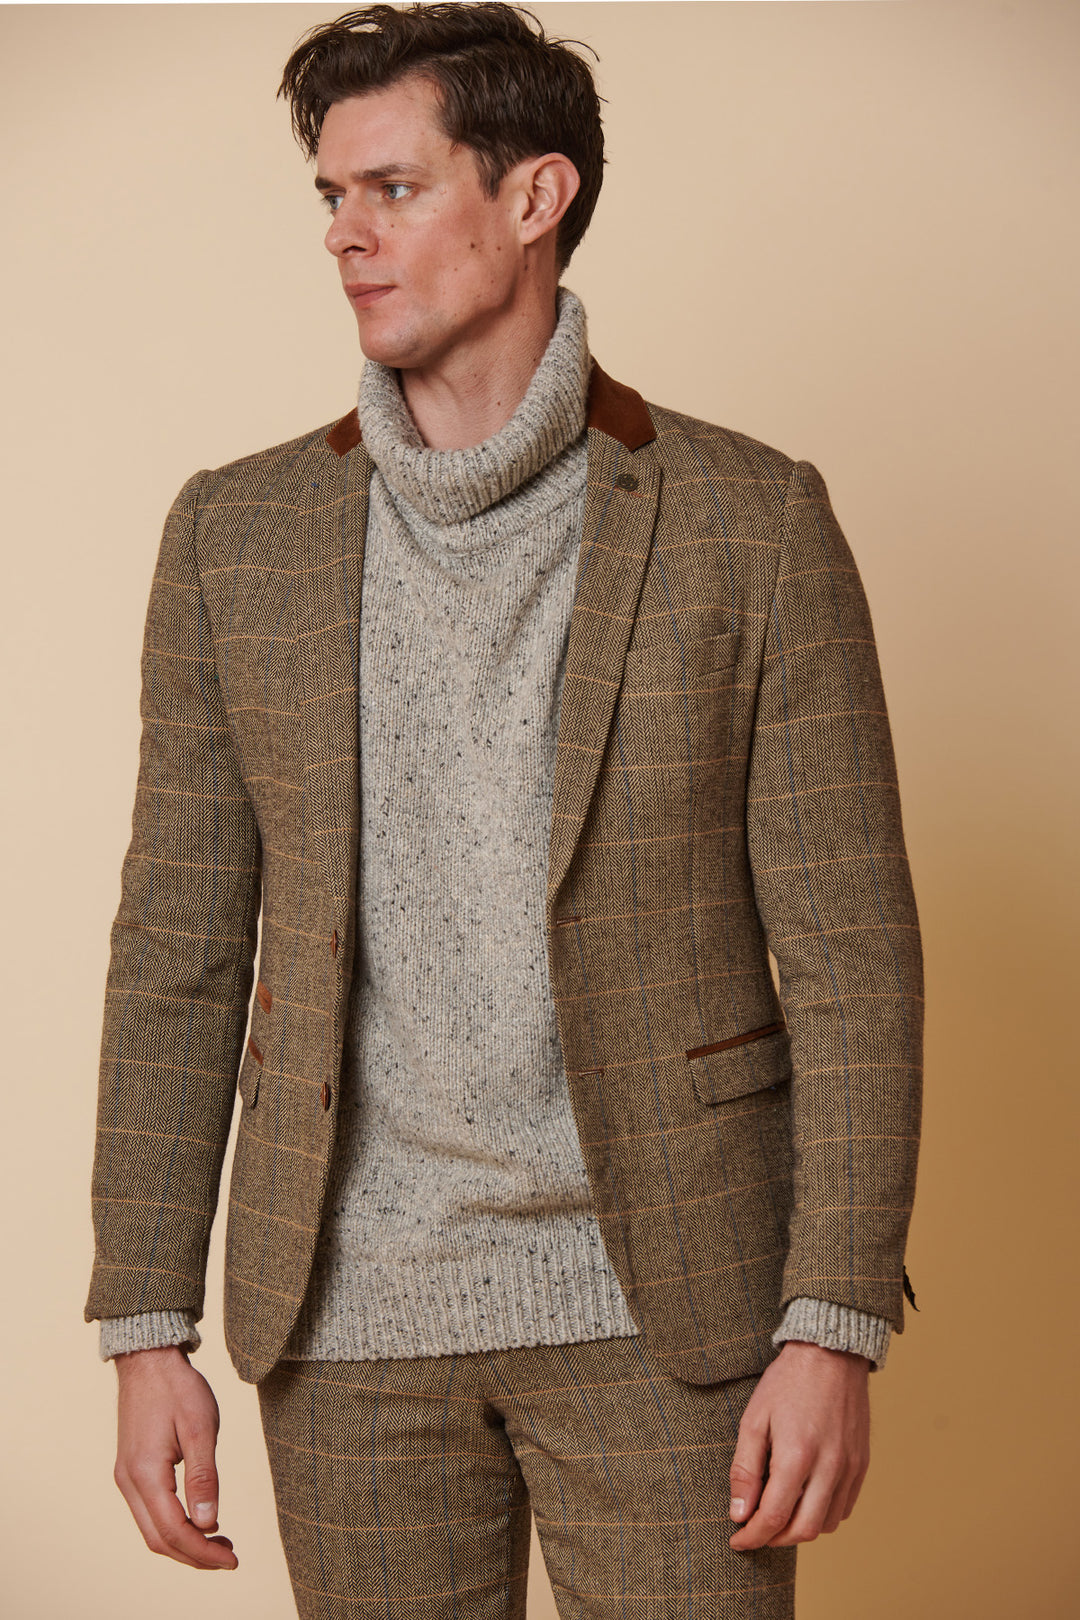 DX7 - Tan Tweed Check Two Piece Suit